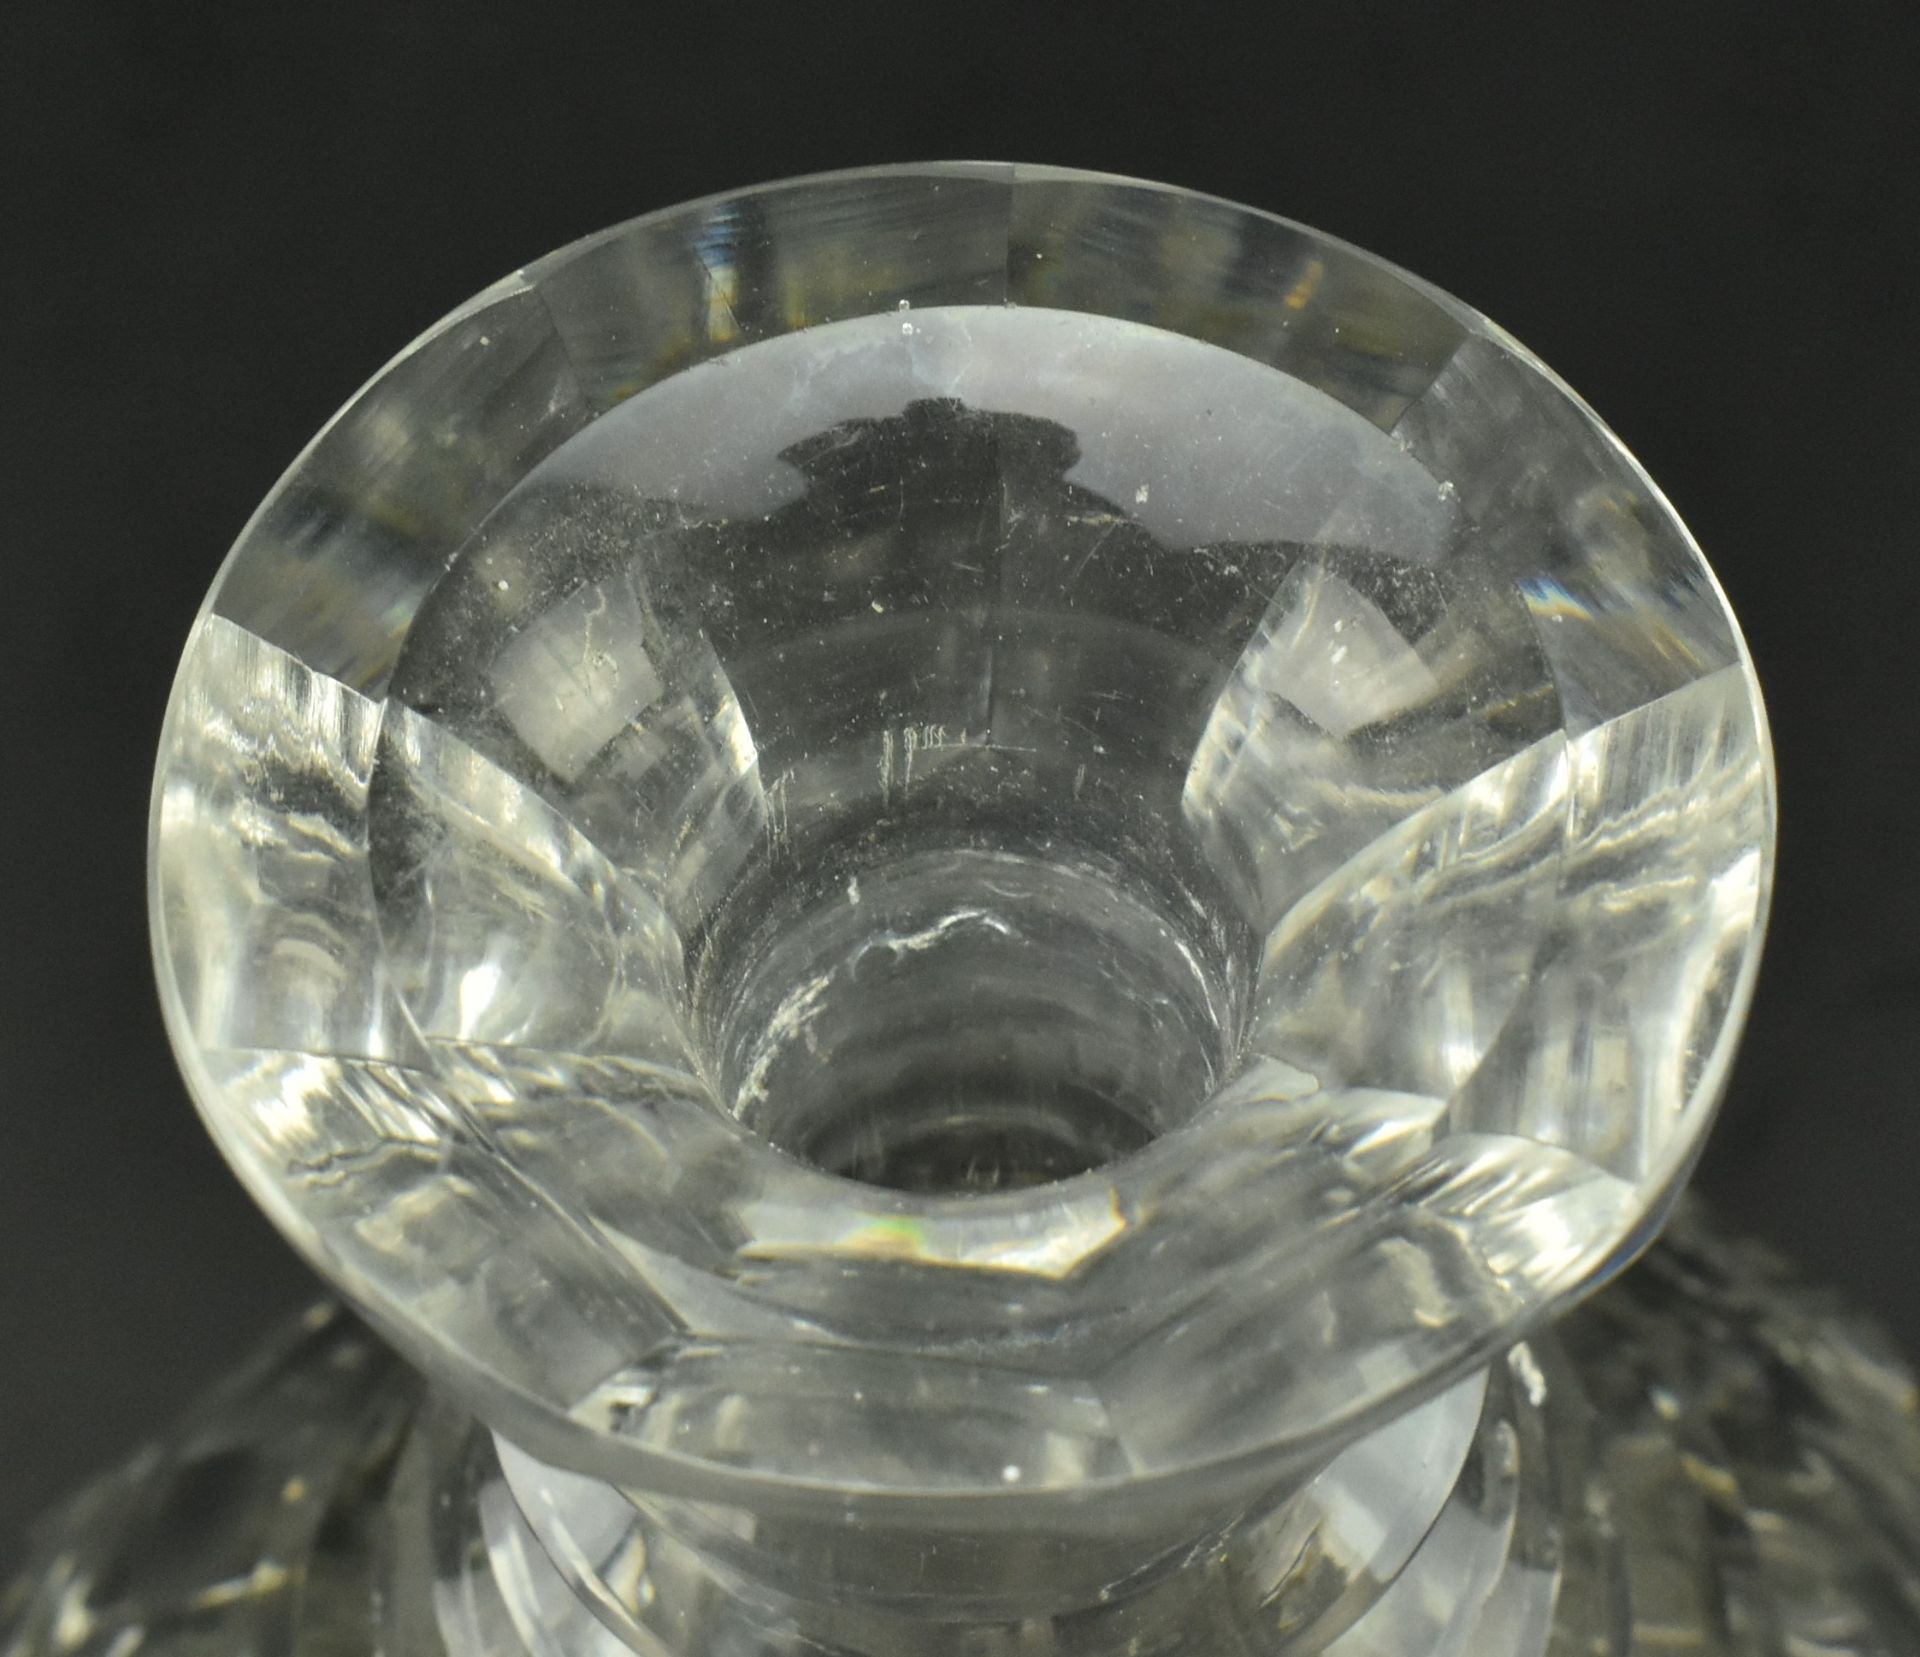 EARLY 19TH CENTURY HEAVY GLASS DECANTER, HOLLOW STOPPER - Image 3 of 8